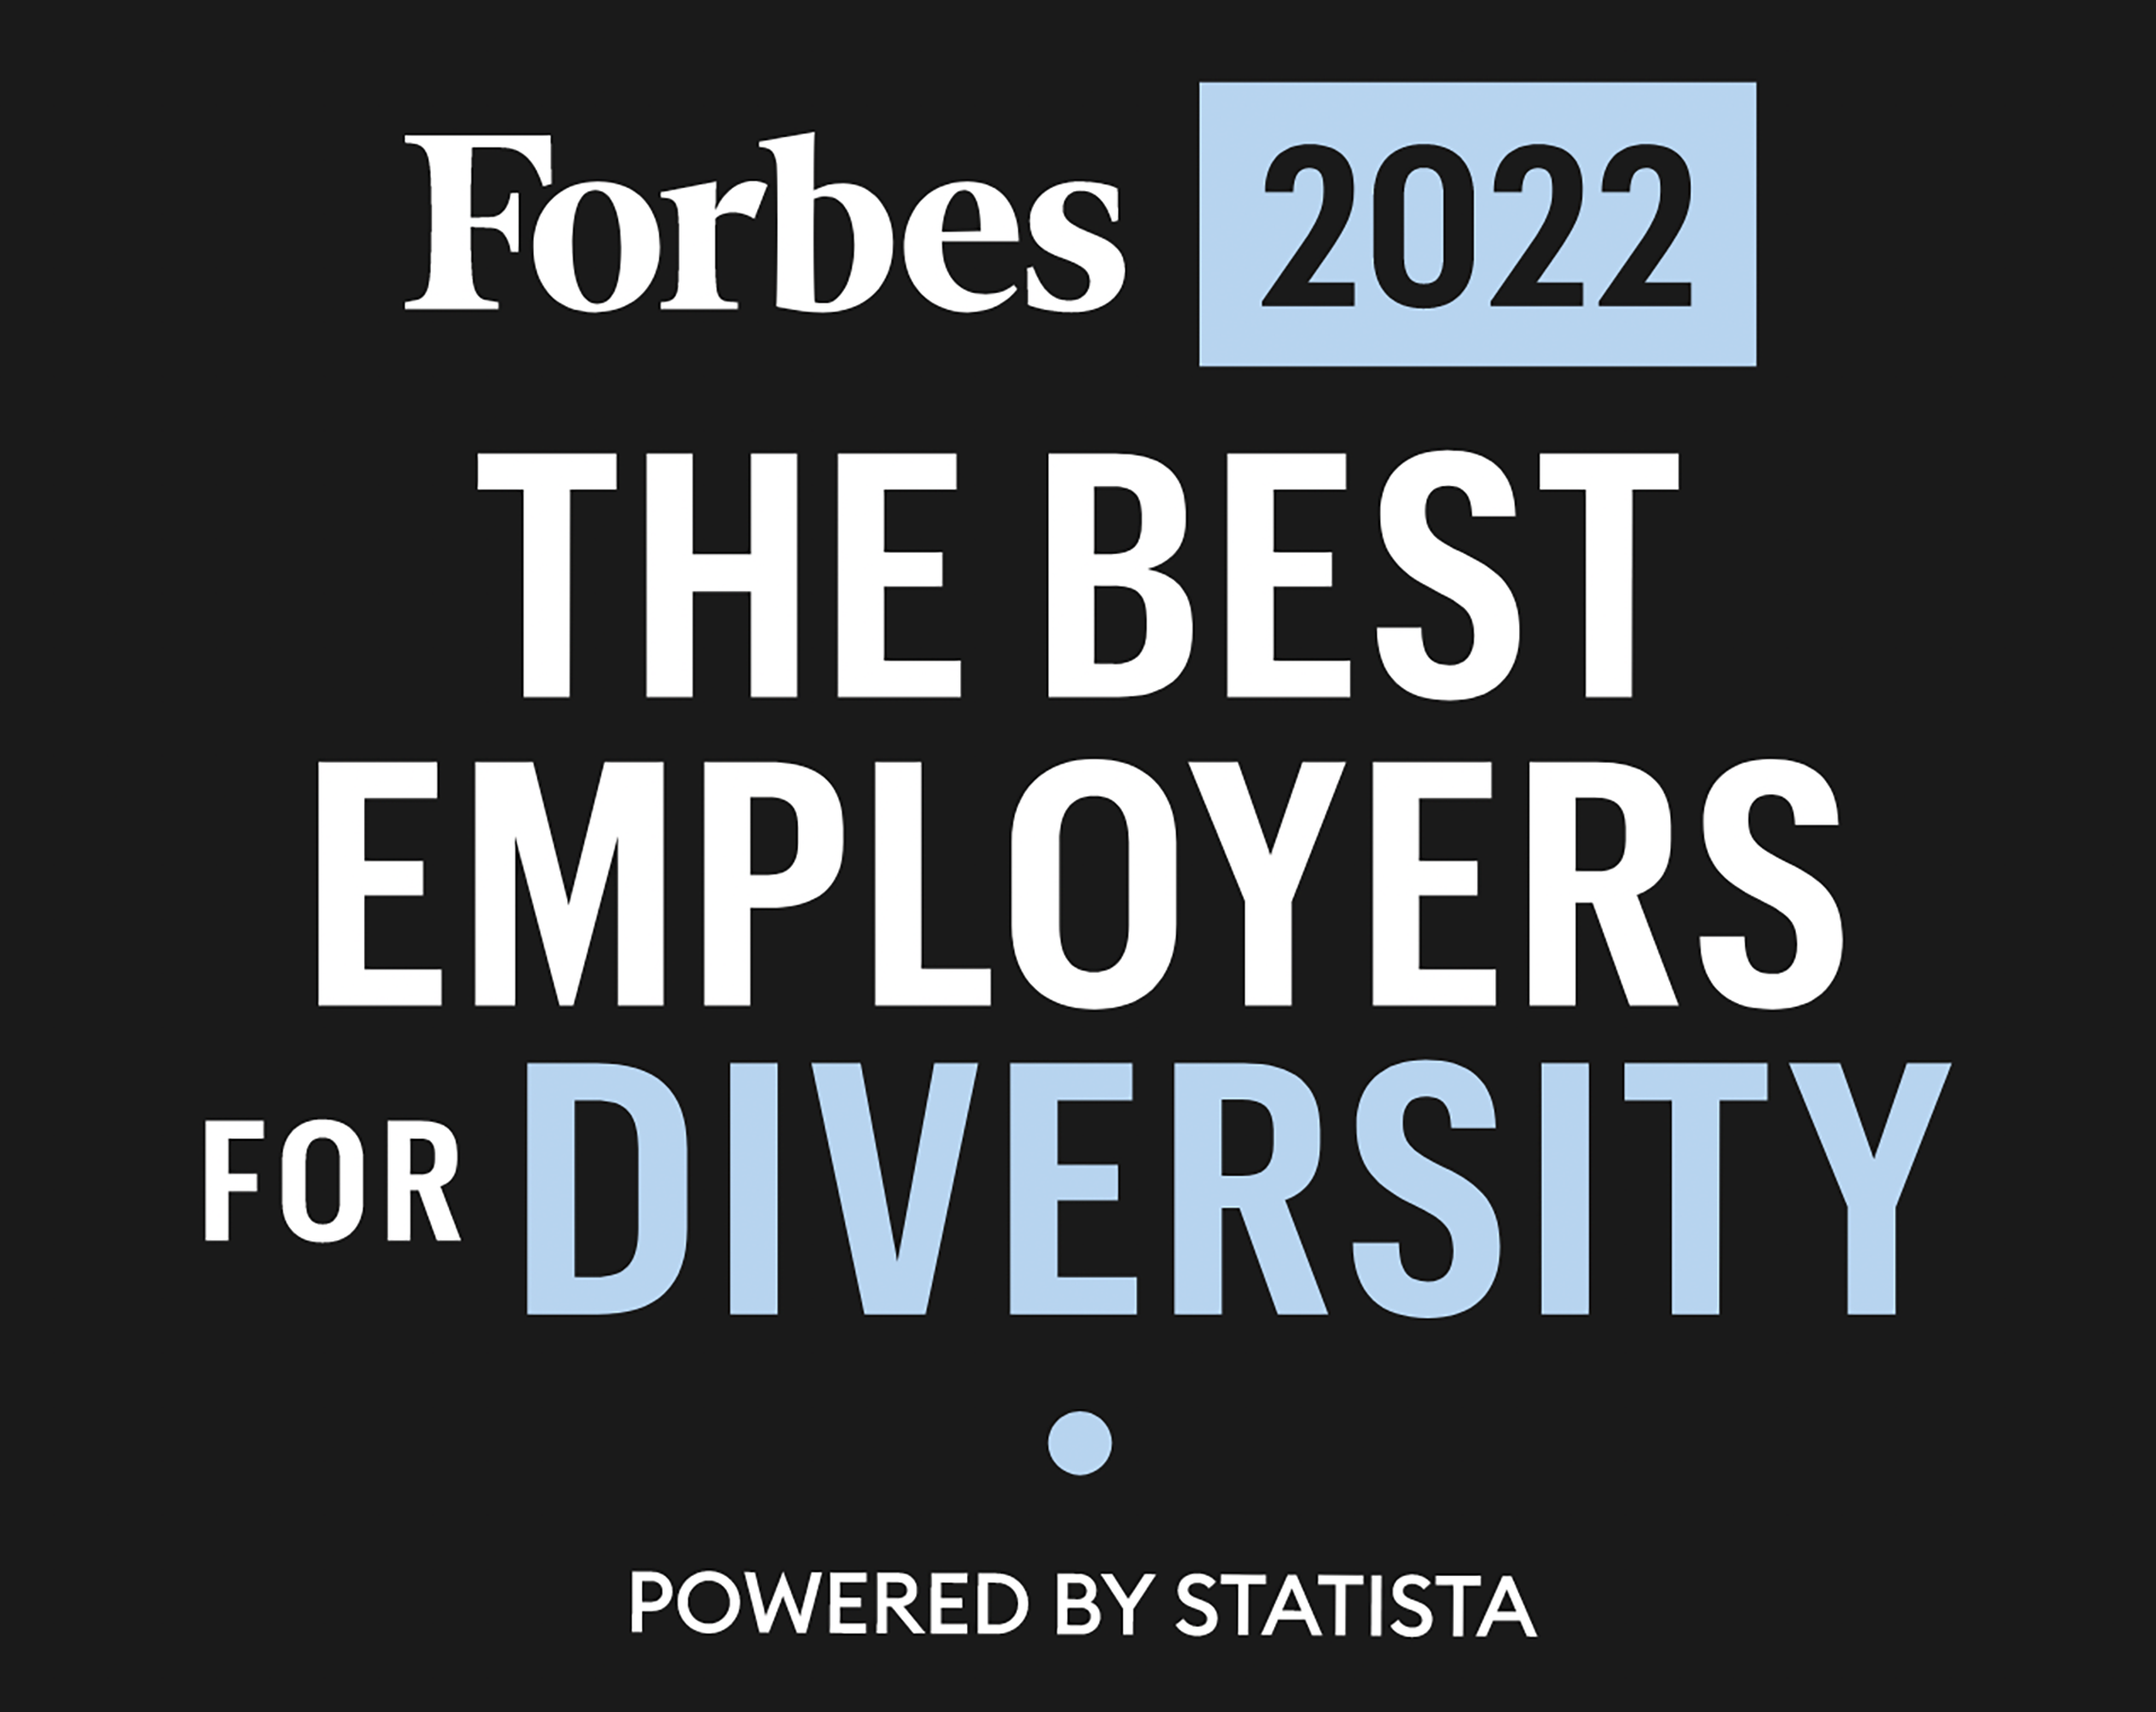 Forbes 2022 The Best Employers for Diversity